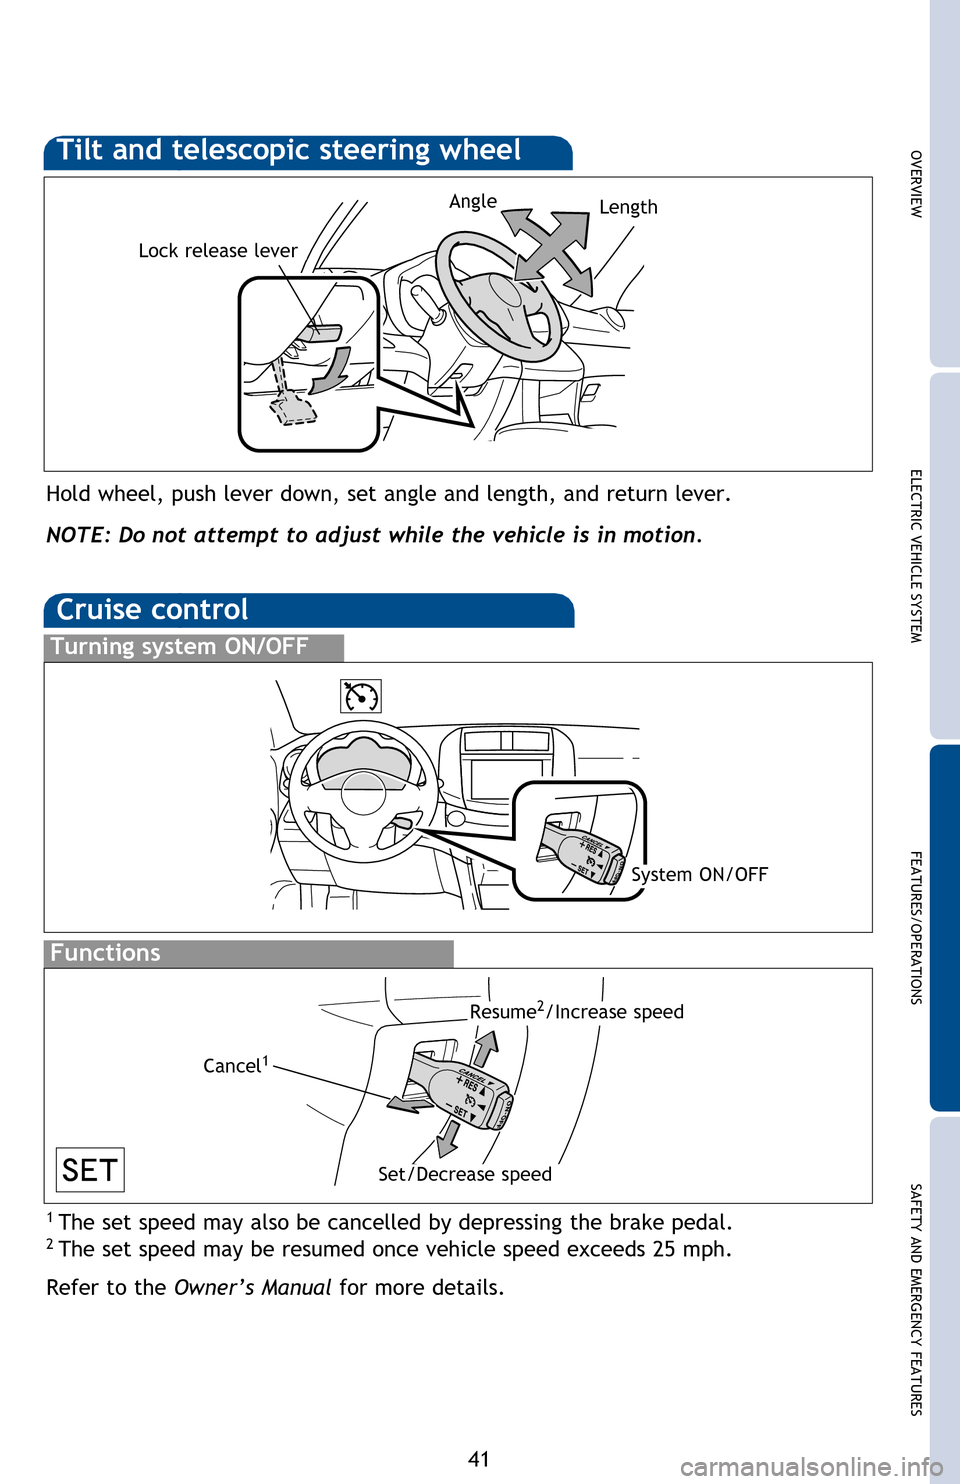 TOYOTA RAV4 EV 2012 1.G Quick Reference Guide OVERVIEWELECTRIC VEHICLE SYSTEM FEATURES/OPERATIONS
SAFETY AND EMERGENCY FEATURES
41
“MODE” 
Push to turn audio ON and select an audio mode. Push and hold to mute or 
pause the current operation.
